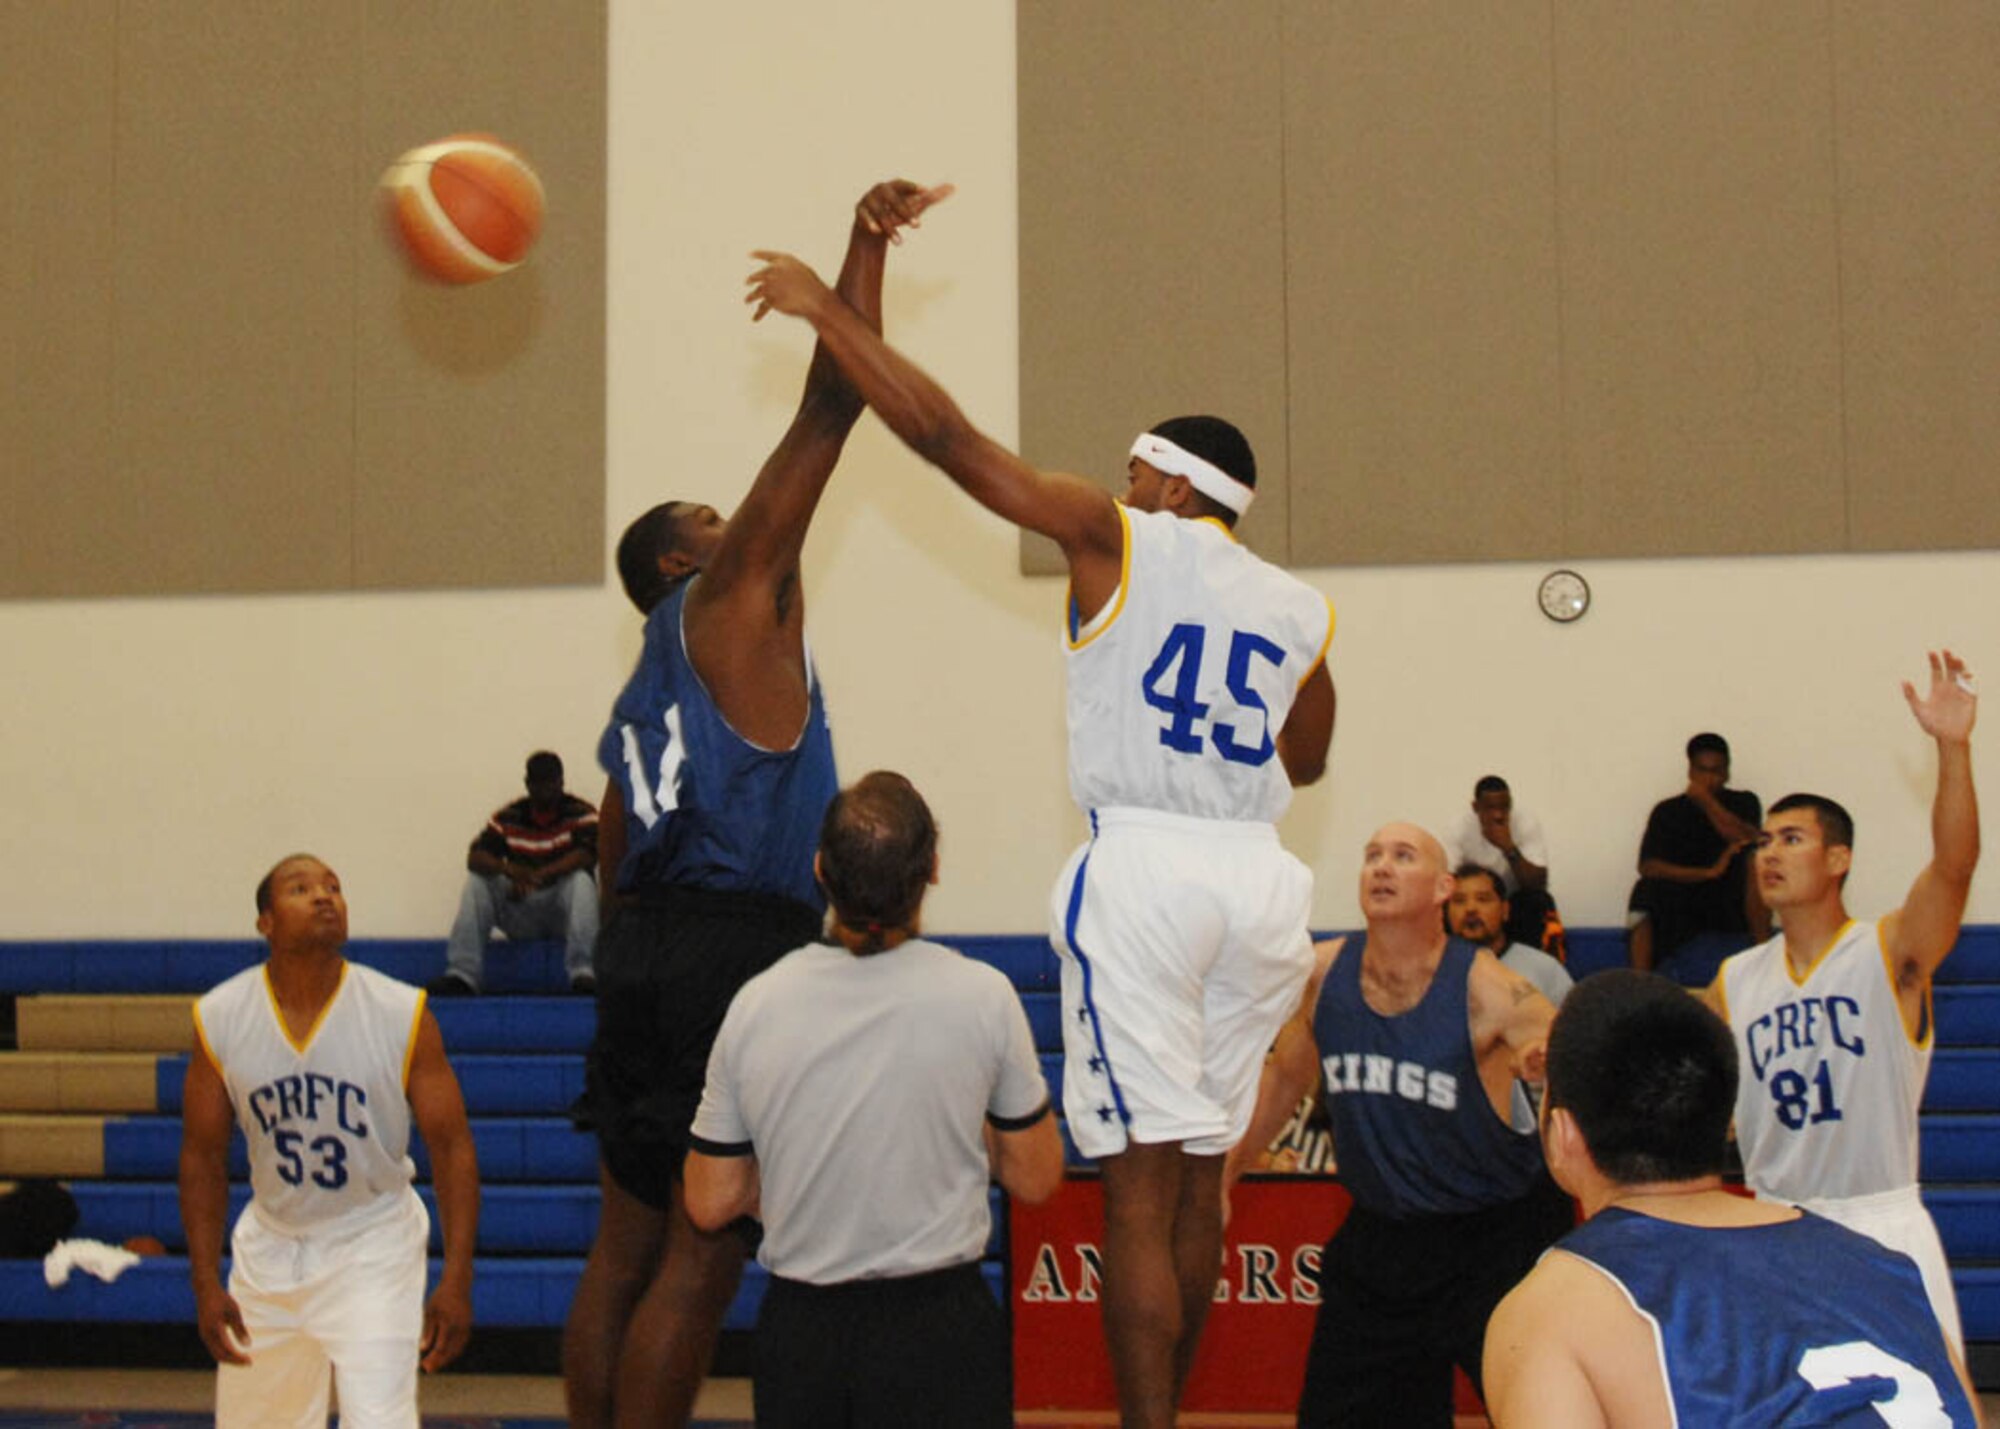 Andersen AFB Stars tip off against the Budweiser Kings, a local Guam basketball team, officially starting the  second game of the Andersen Summer Slam tournament at the Coral Reef Fitness Center here June 27. The Andersen Summer Slam is held annually at Andersen AFB with various teams  around the island and  Pacifia Air Forces. (U.S. Air Force photo by Airman 1st Class Nichelle Griffiths)